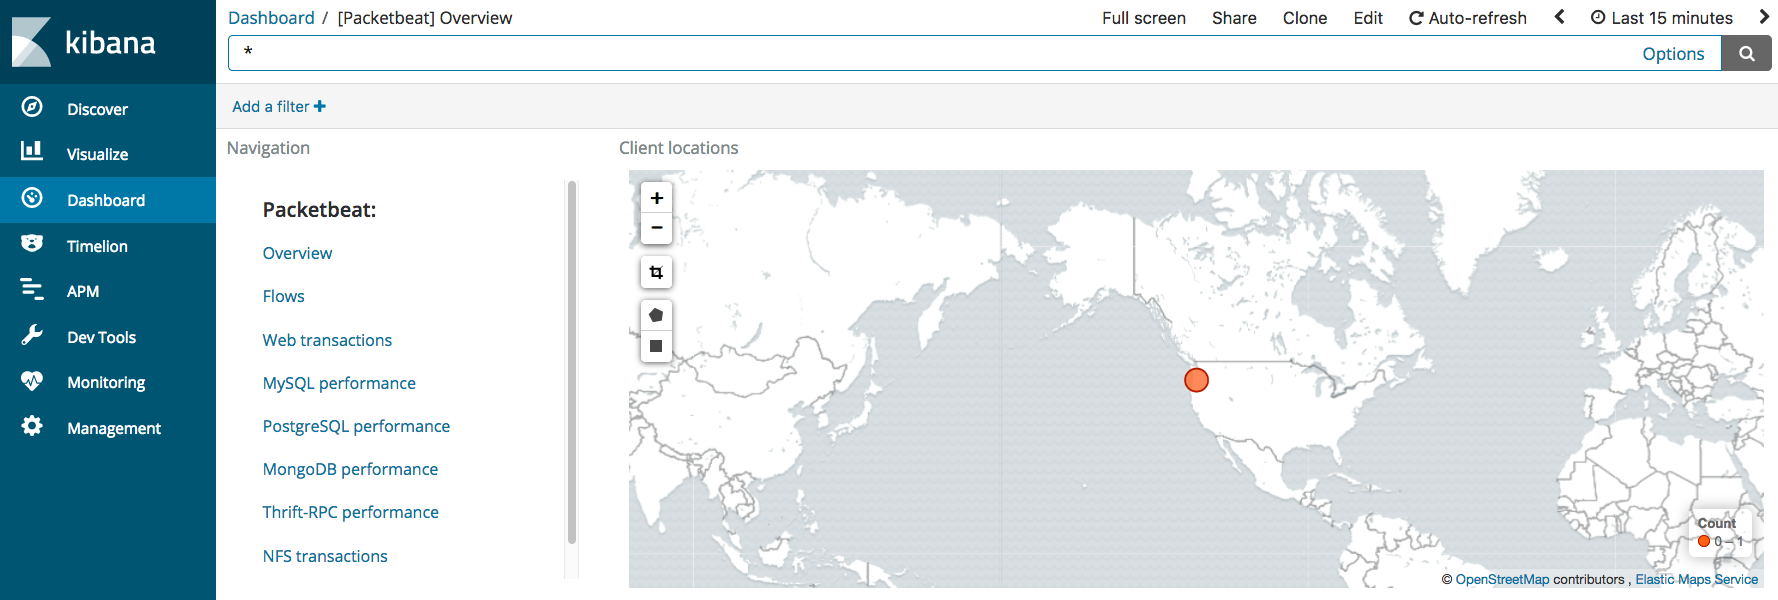 Update Packetbeat client location map in Kibana